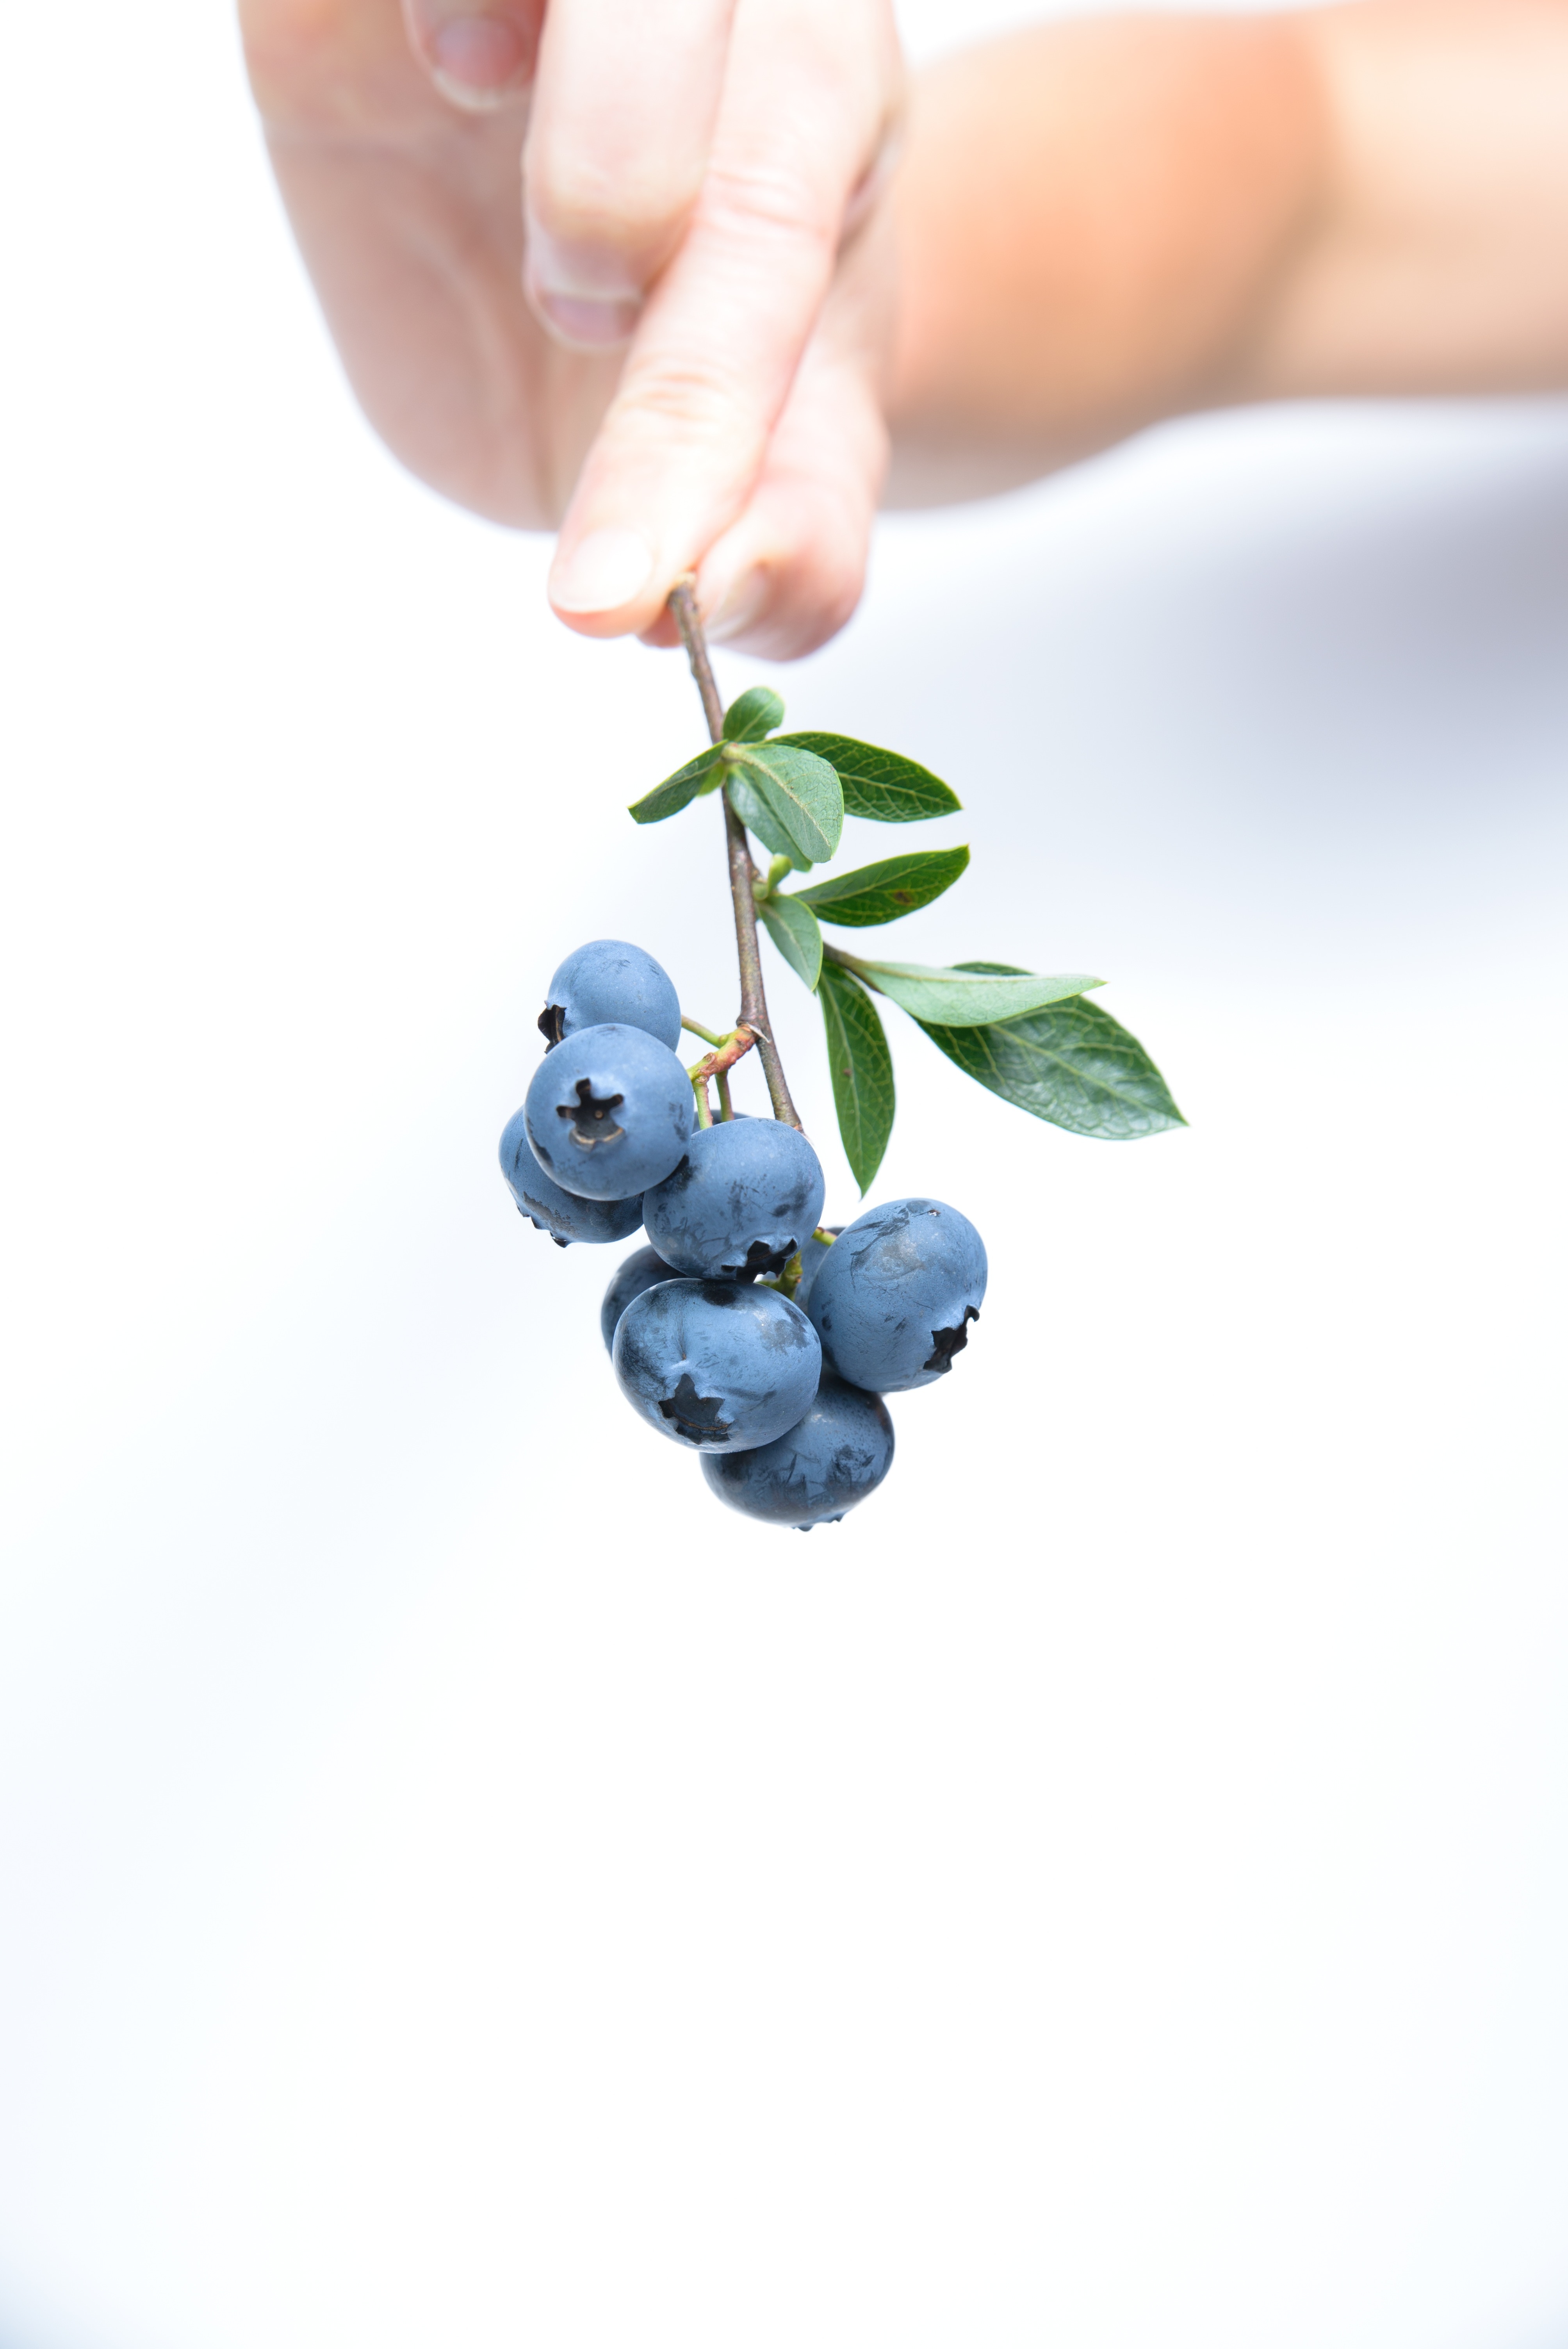 person holding blueberries